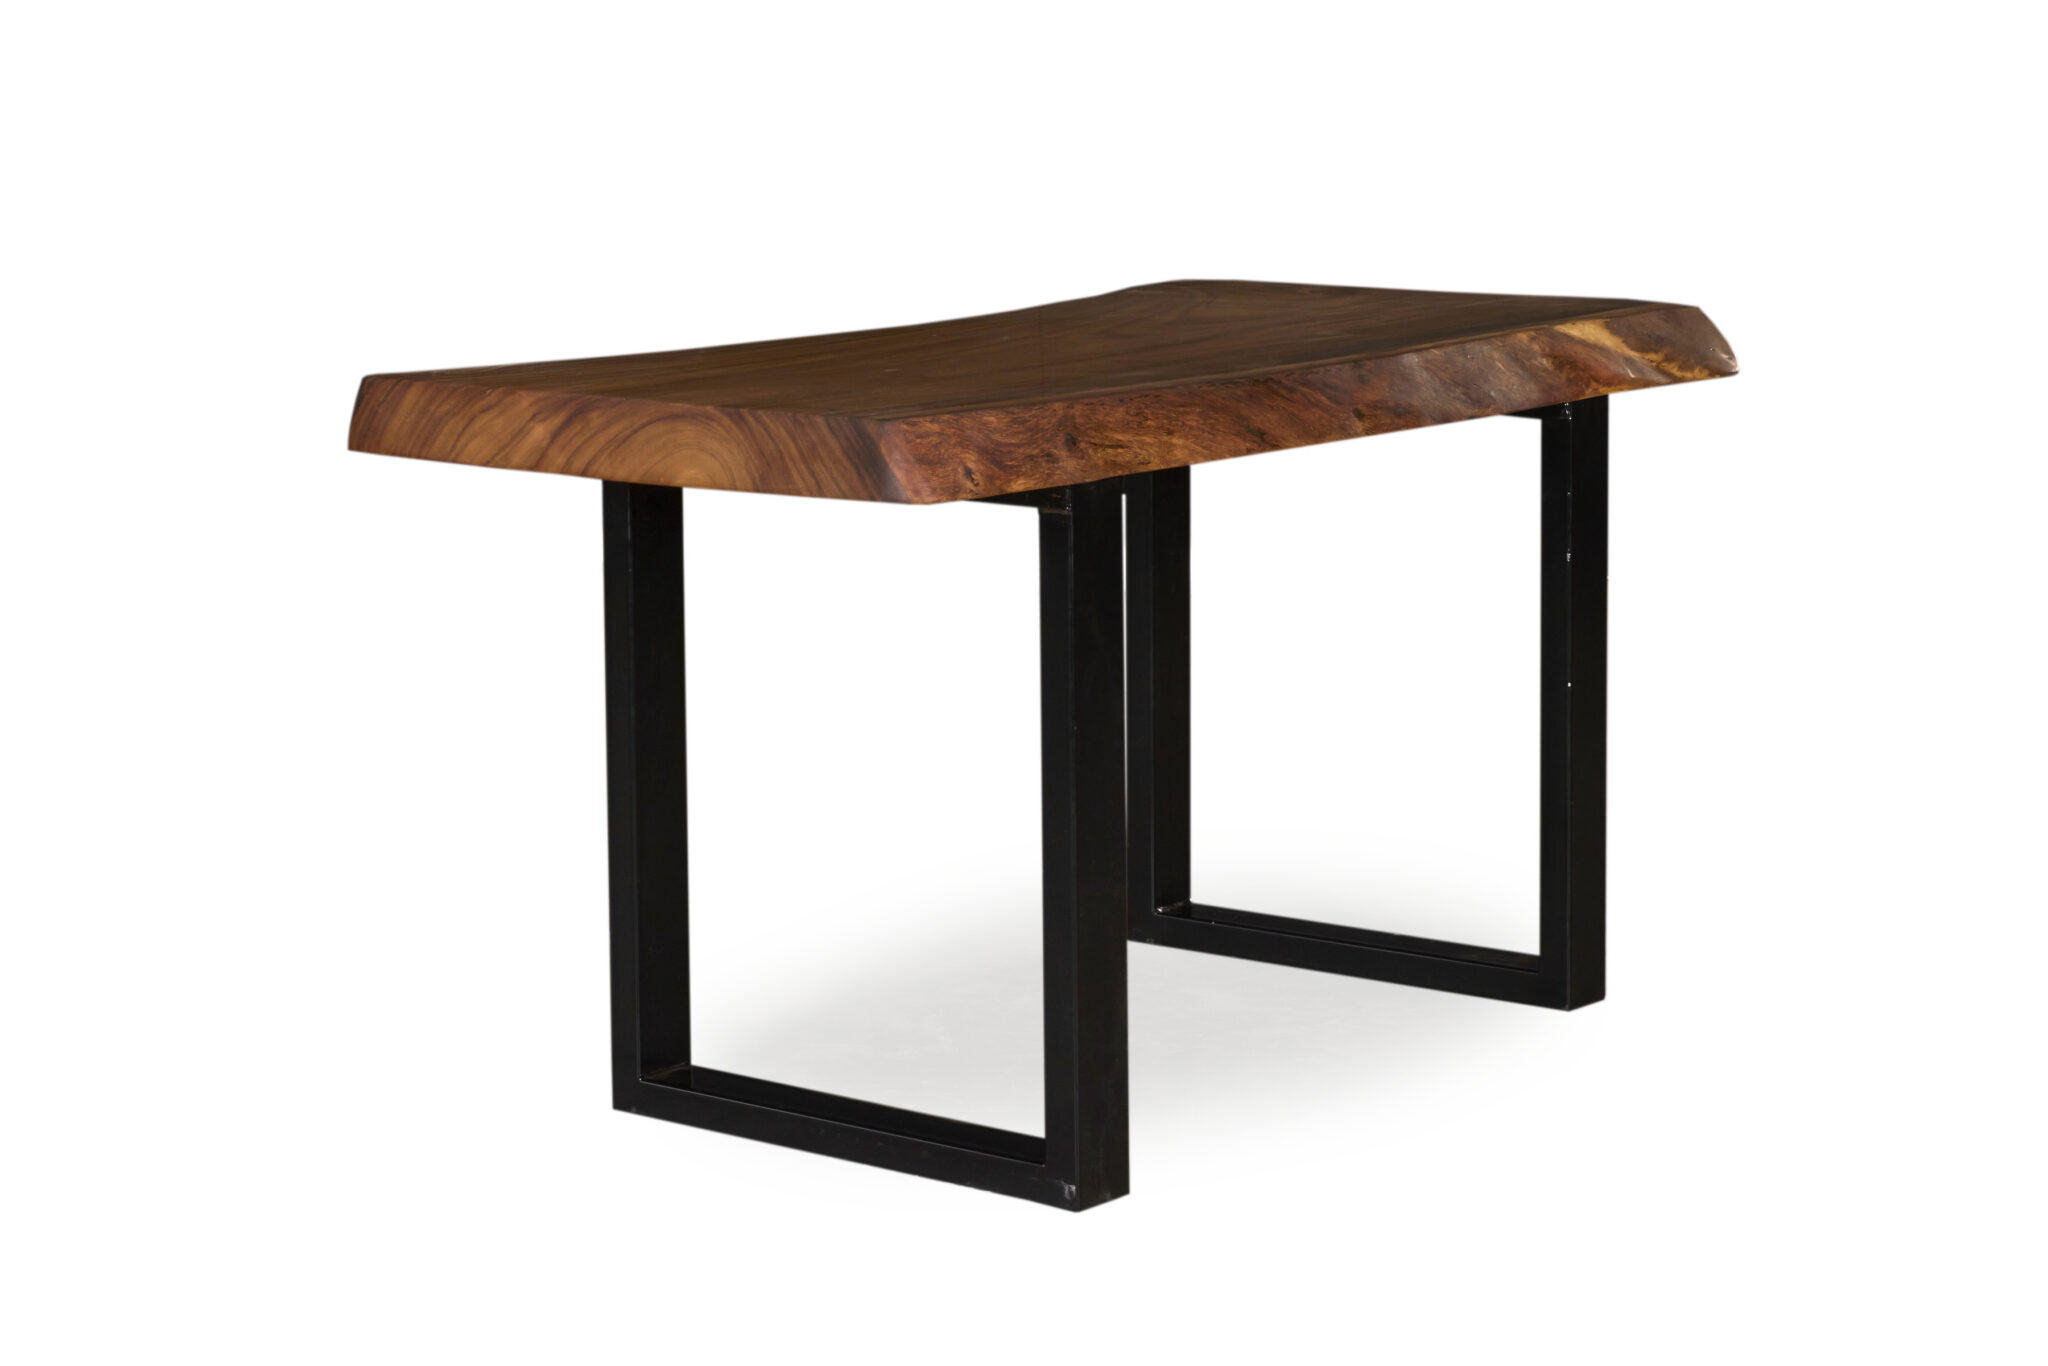 Pacific High Dining Table with natural edge and steel U leg base